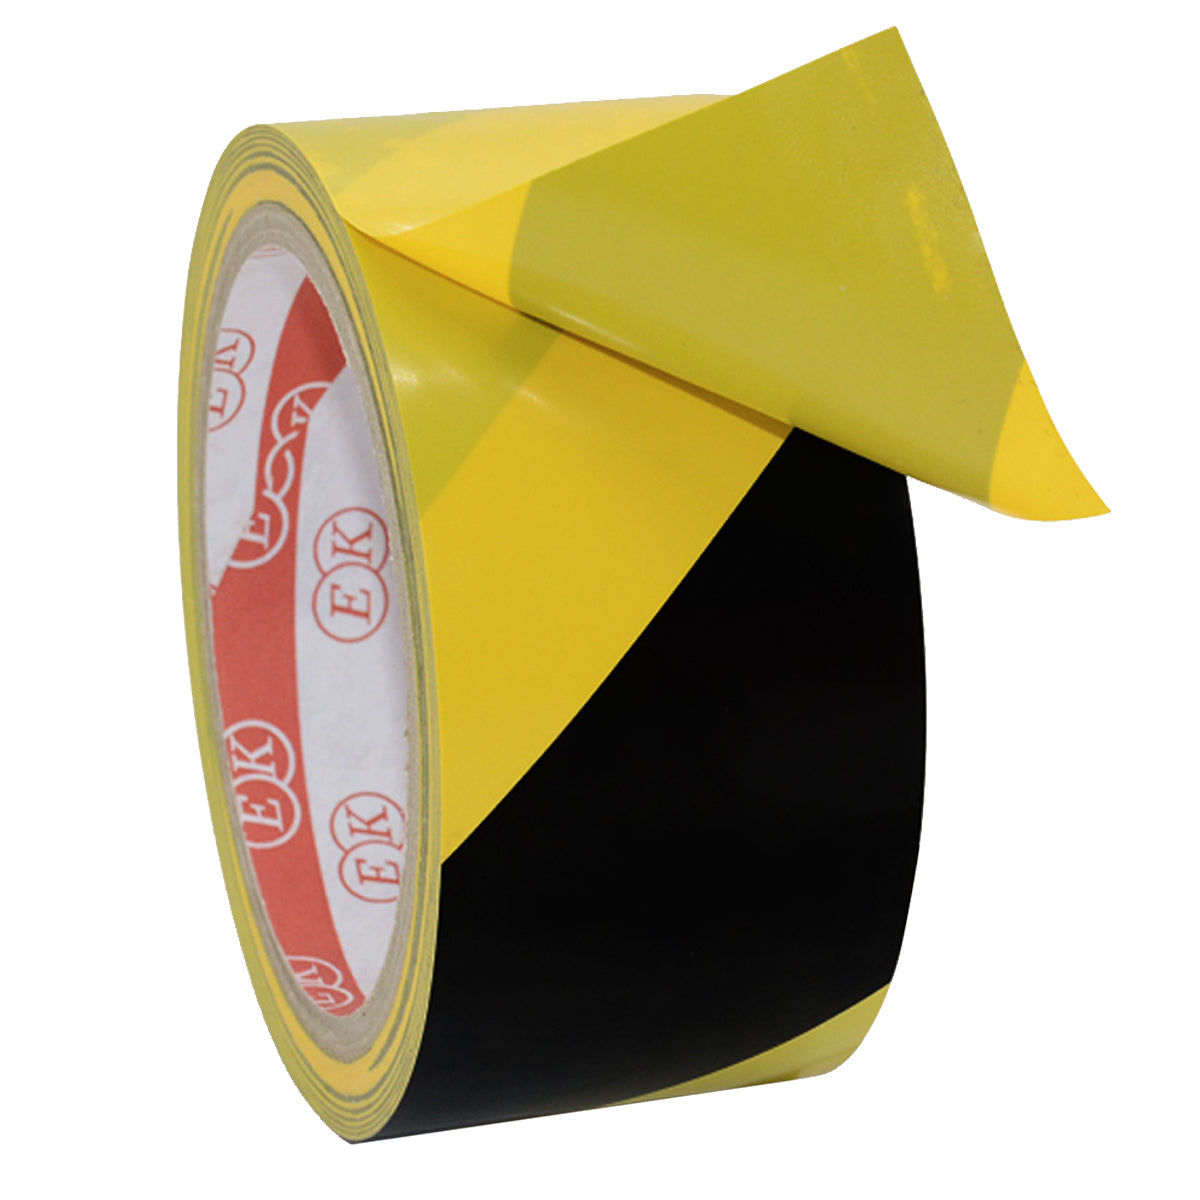 High Strength Adhesive Single-Sided Black and Yellow Standard Hazard Safety Warning Floor Tape for Social Distance, Strong and Water Resistant Tape (4.5cm x 17 meters)